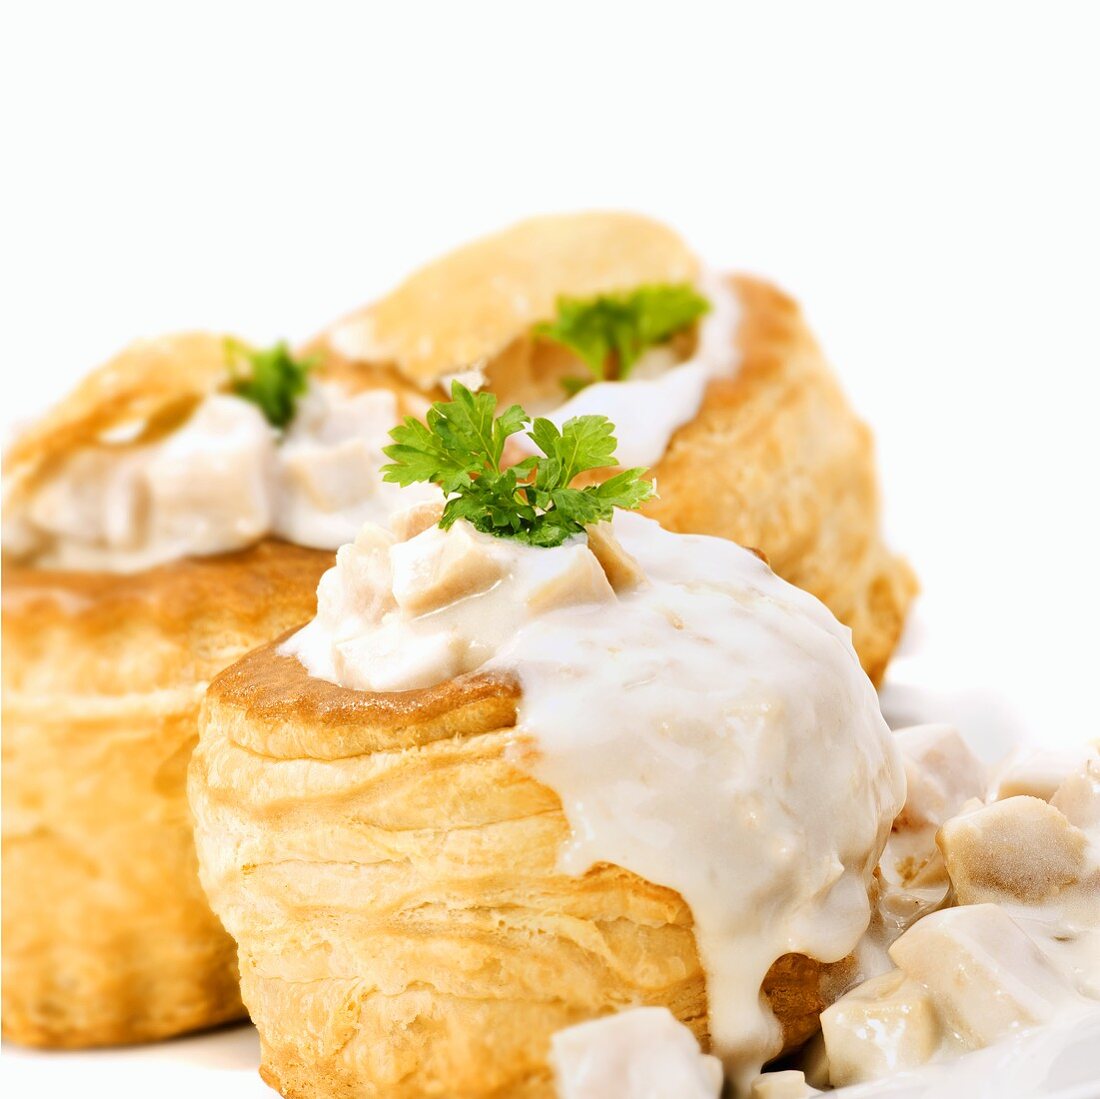 Vol-au-vents filled with ragout fin